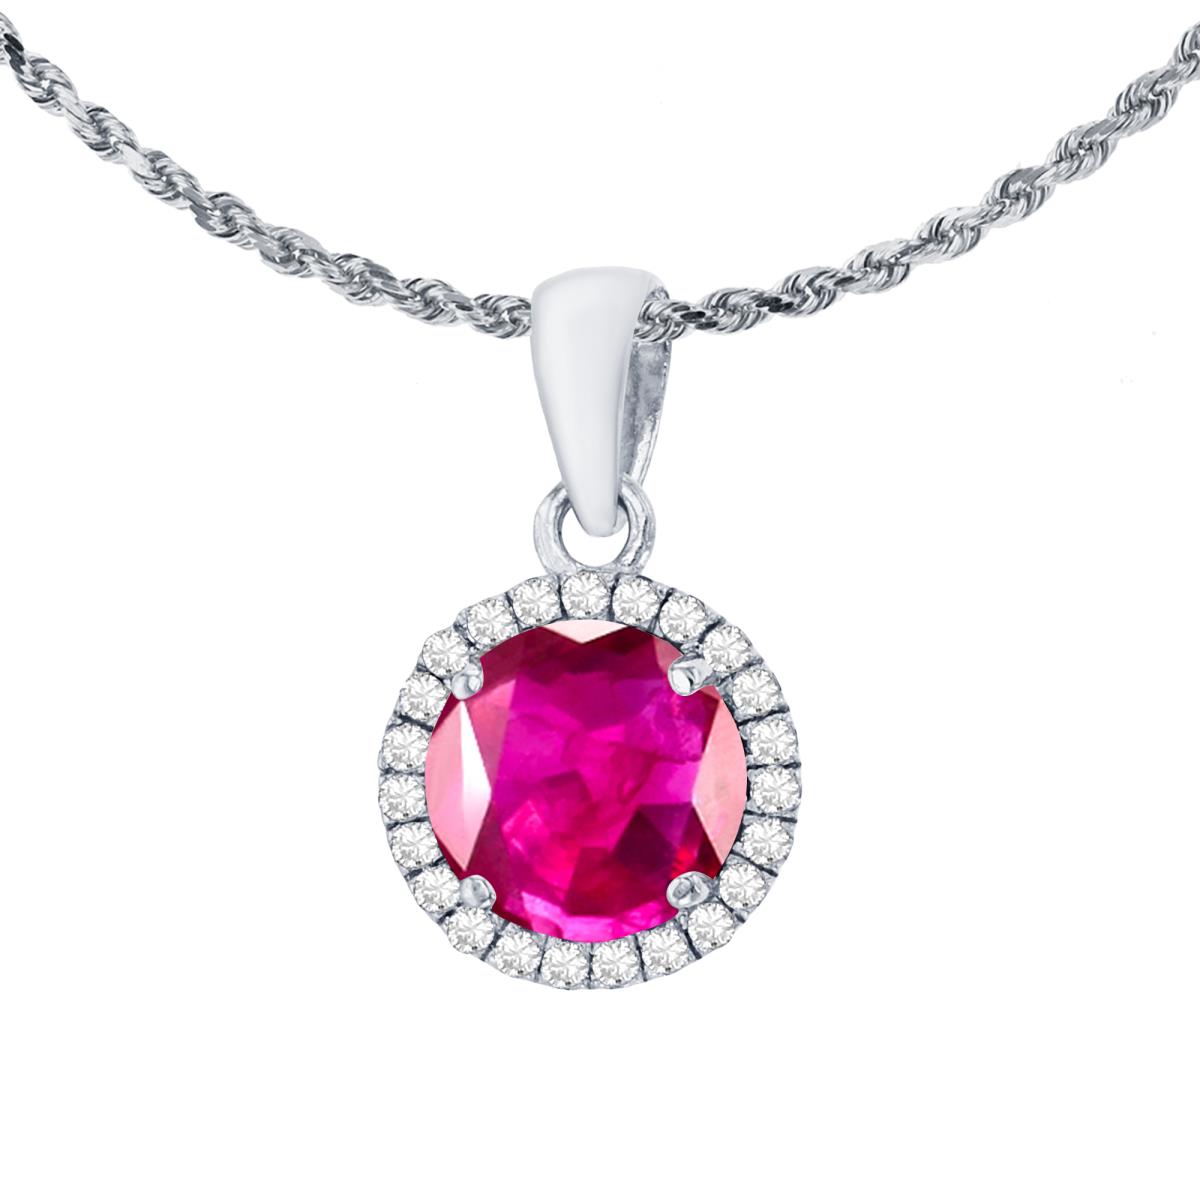 14K White Gold 7mm Round Glass Filled Ruby & 0.12 CTTW Diamond Halo 18" Rope Chain Necklace